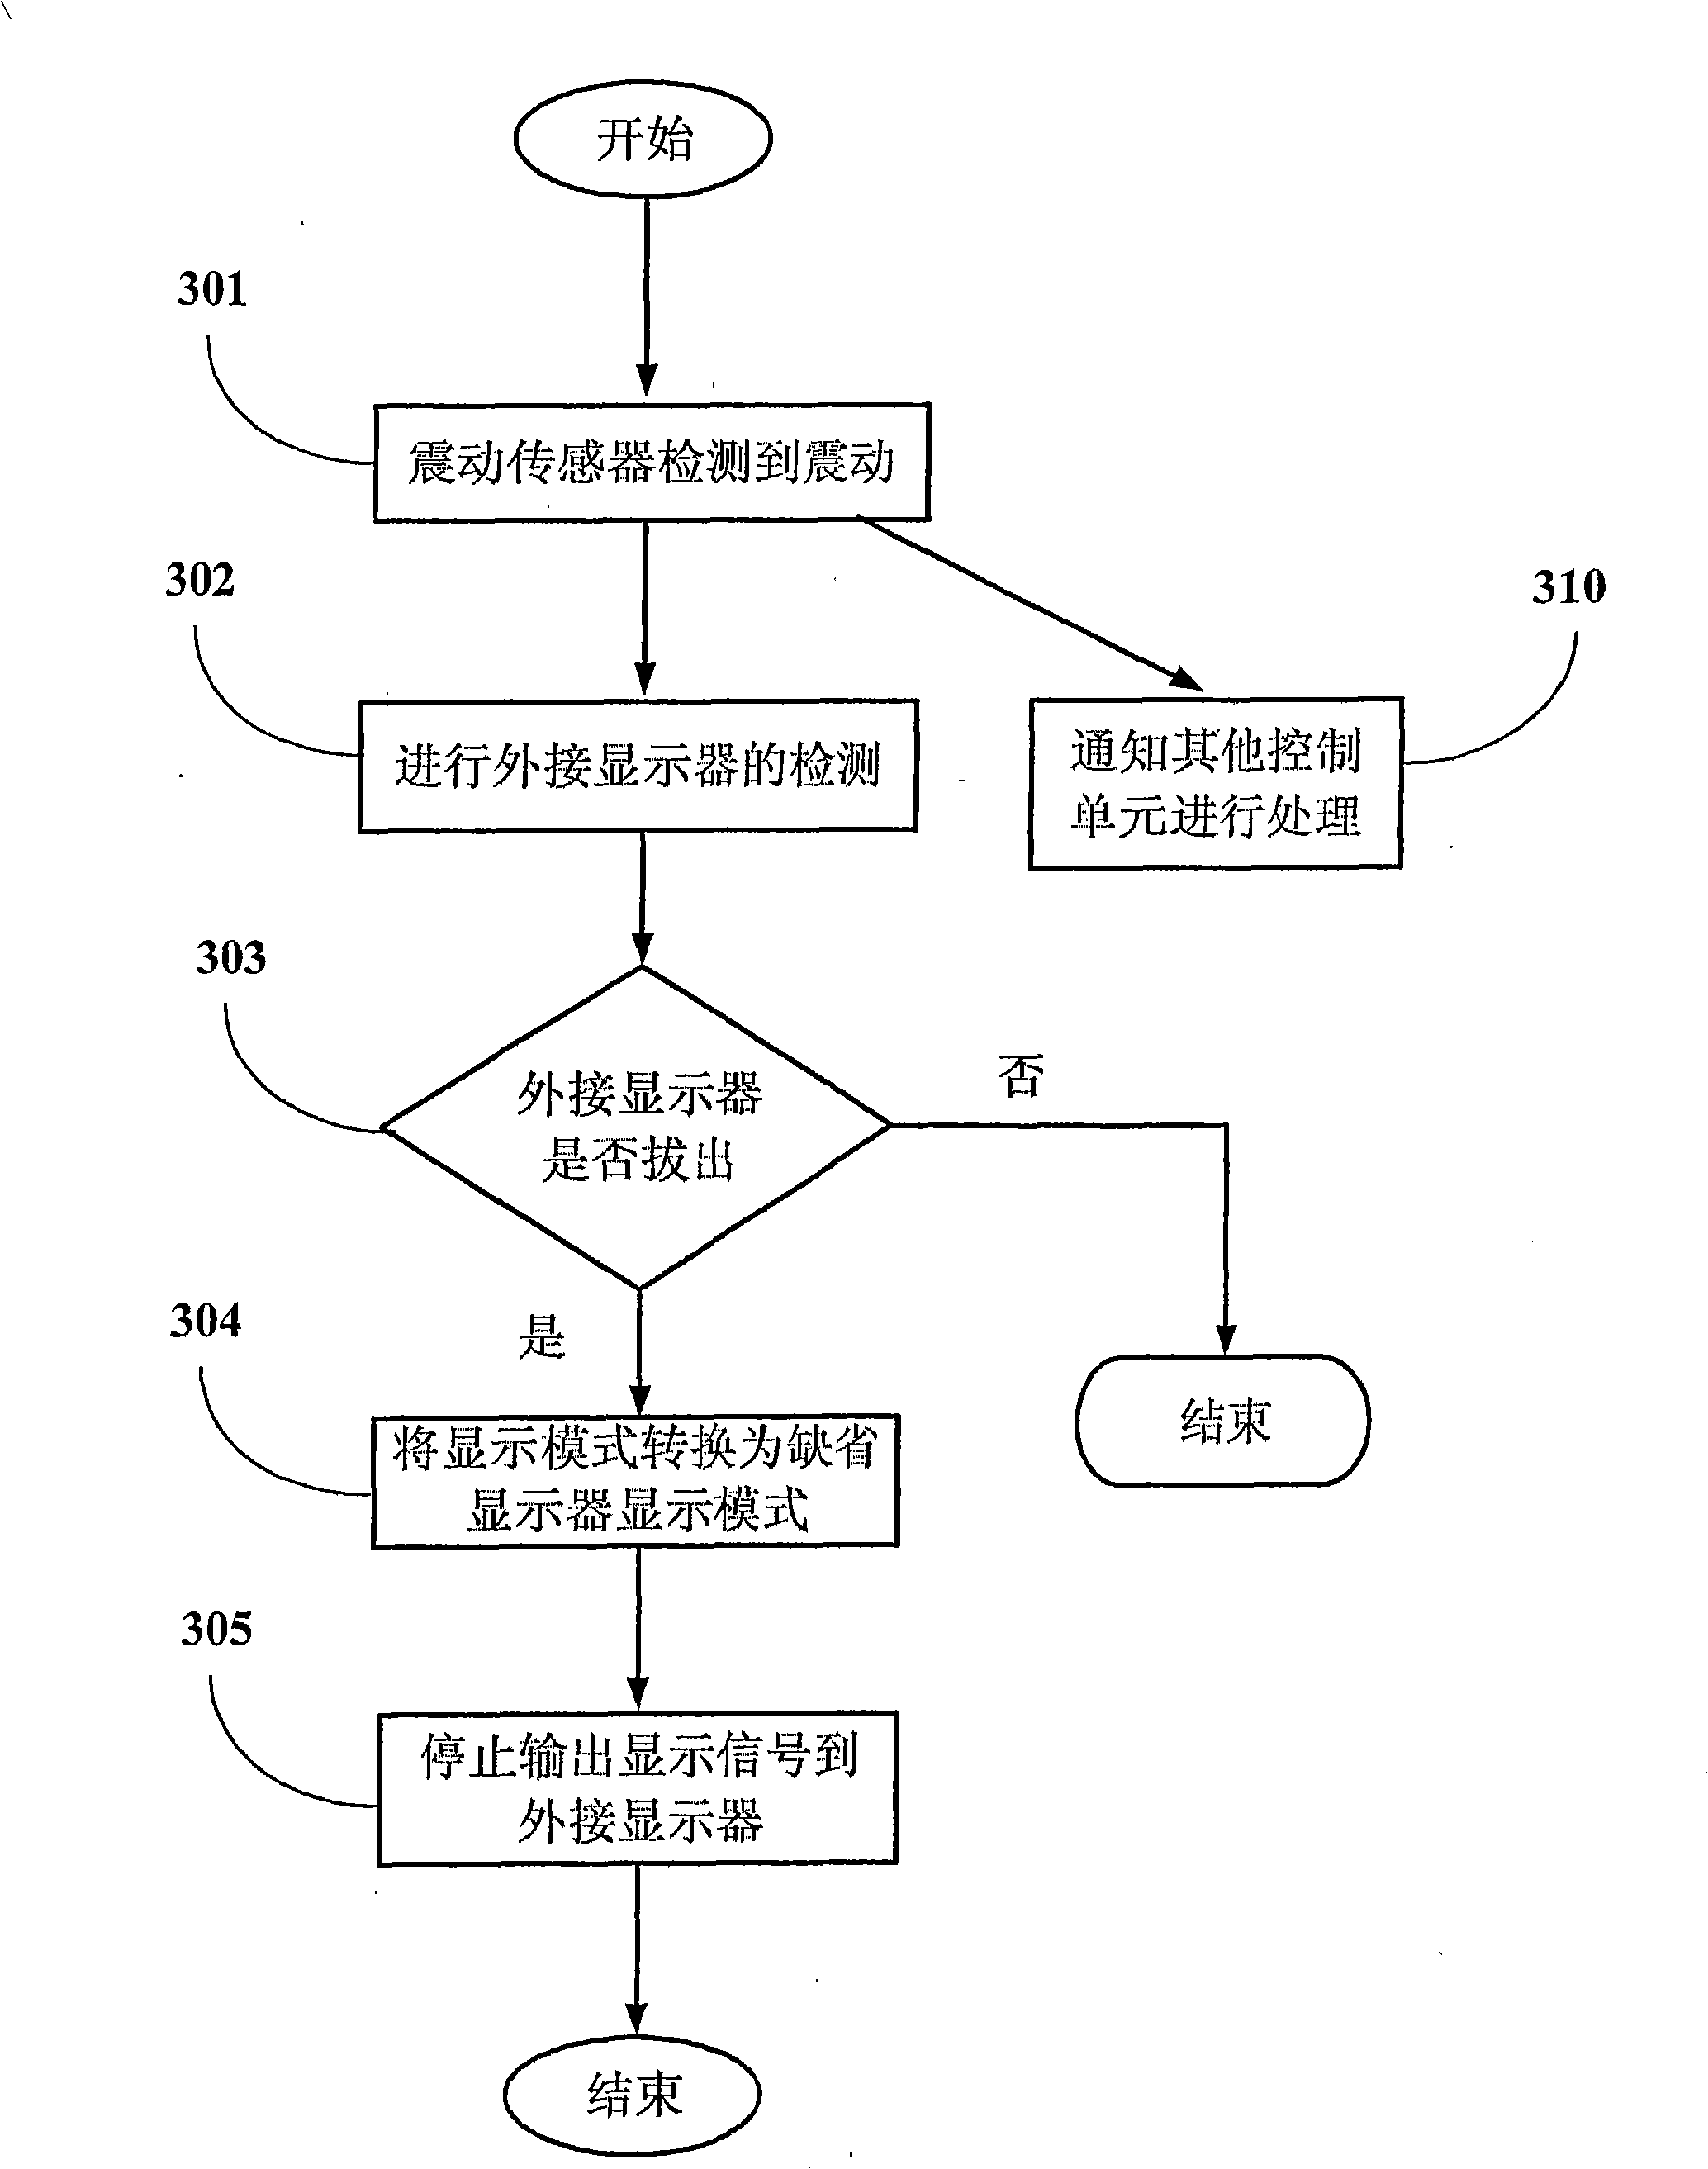 Method and apparatus for processing computing system external connection equipment